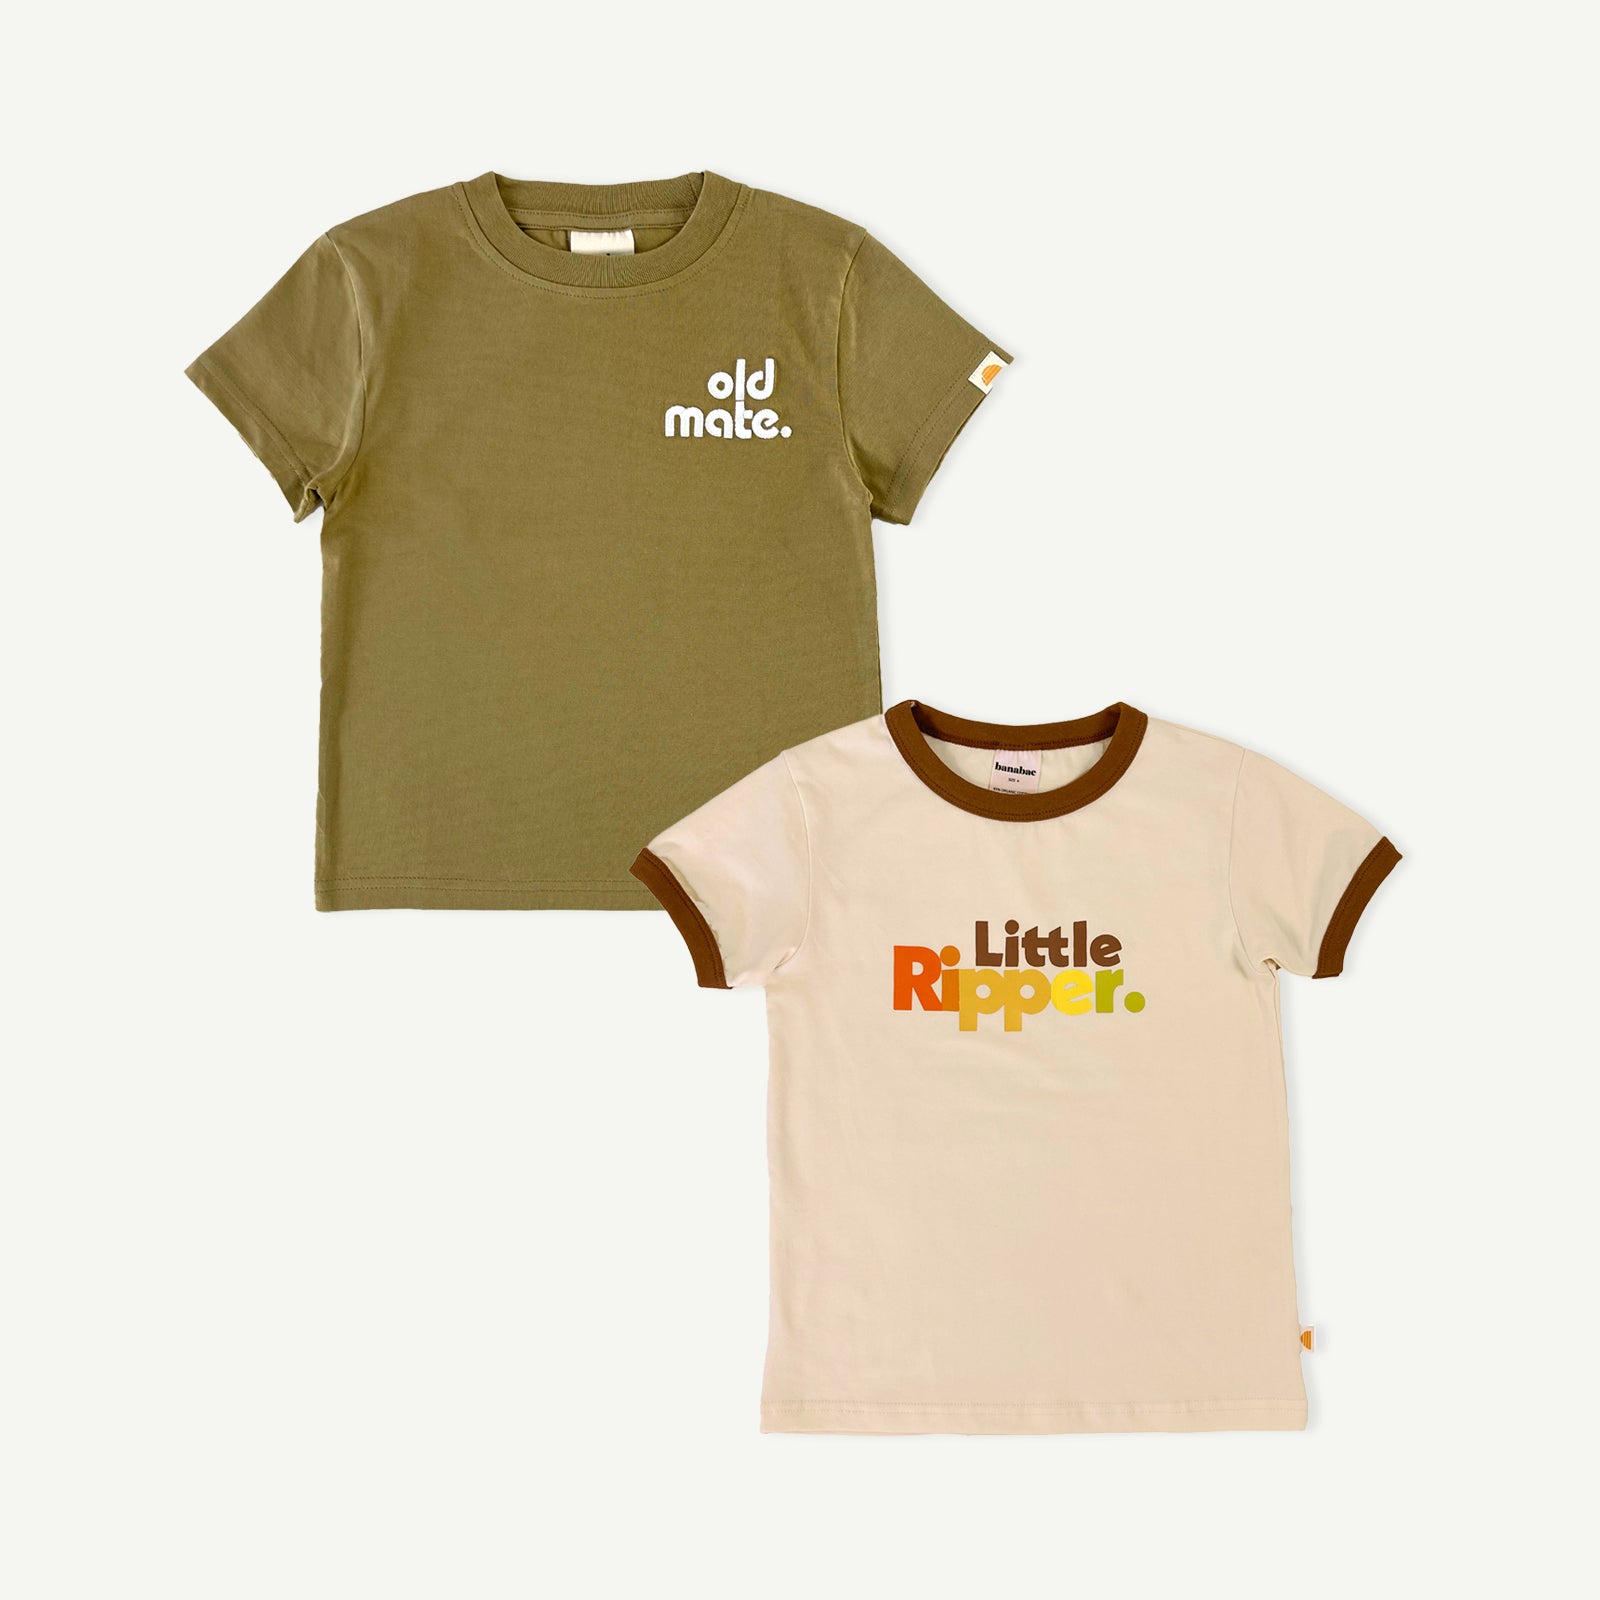 Old Mate and Little Ripper Tee Bundle